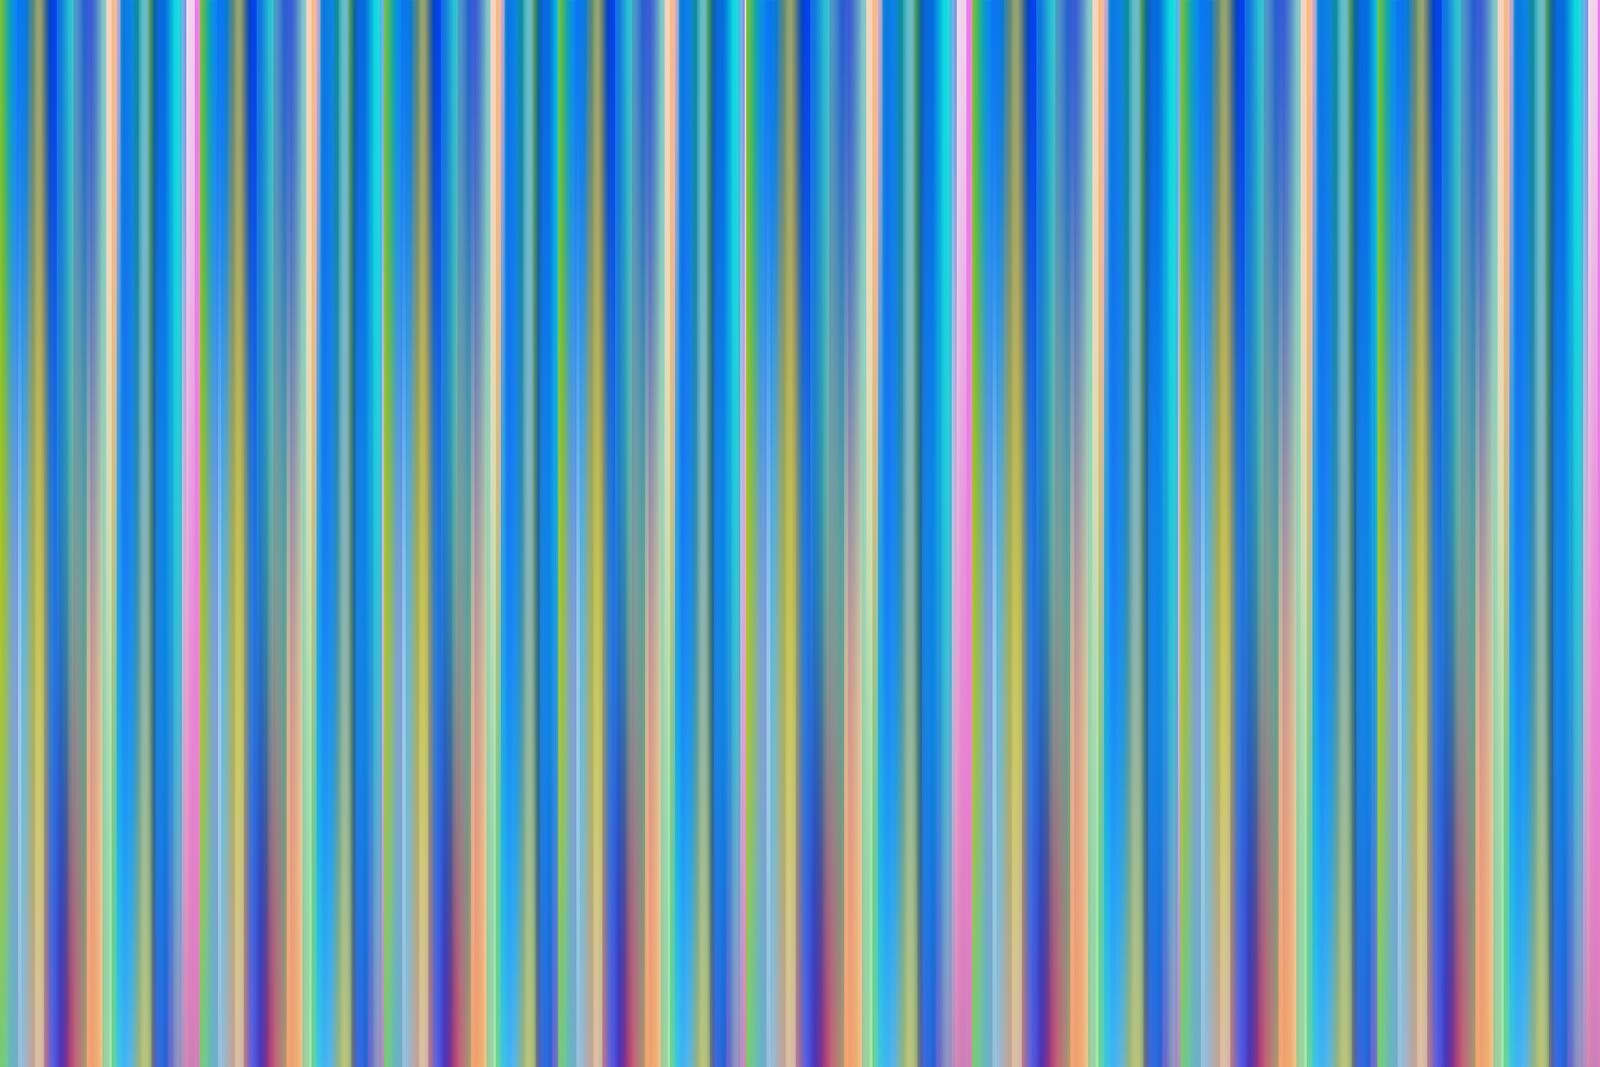 Wallpapers colorful artist pattern on the desktop